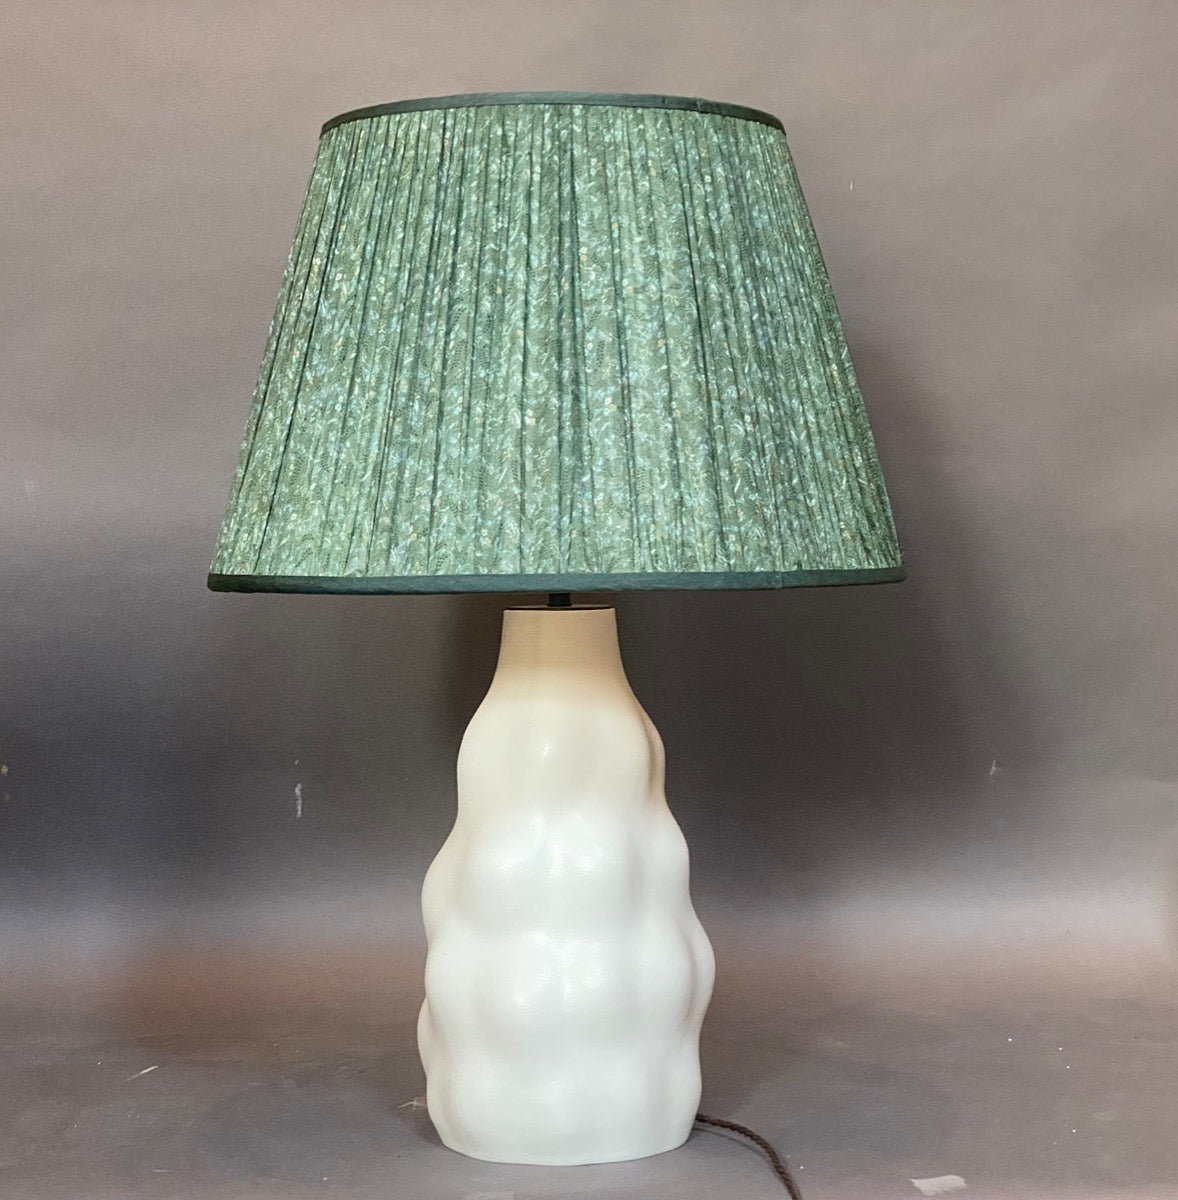 Sea green floral lampshade on lamp